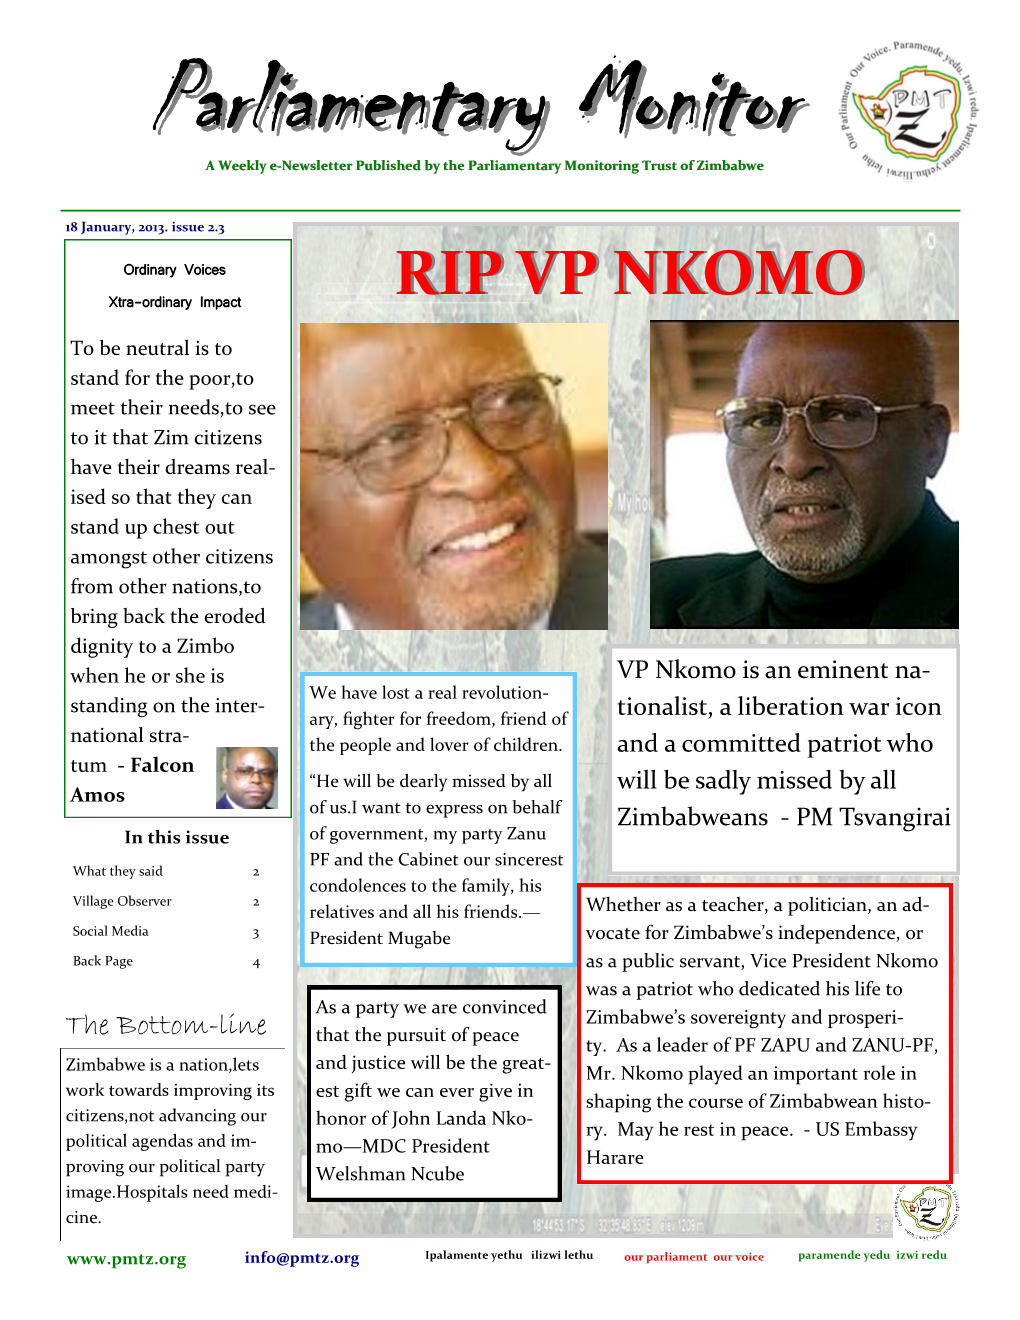 Parliamentary Monitormonitor a Weekly E-Newsletter Published by the Parliamentary Monitoring Trust of Zimbabwe